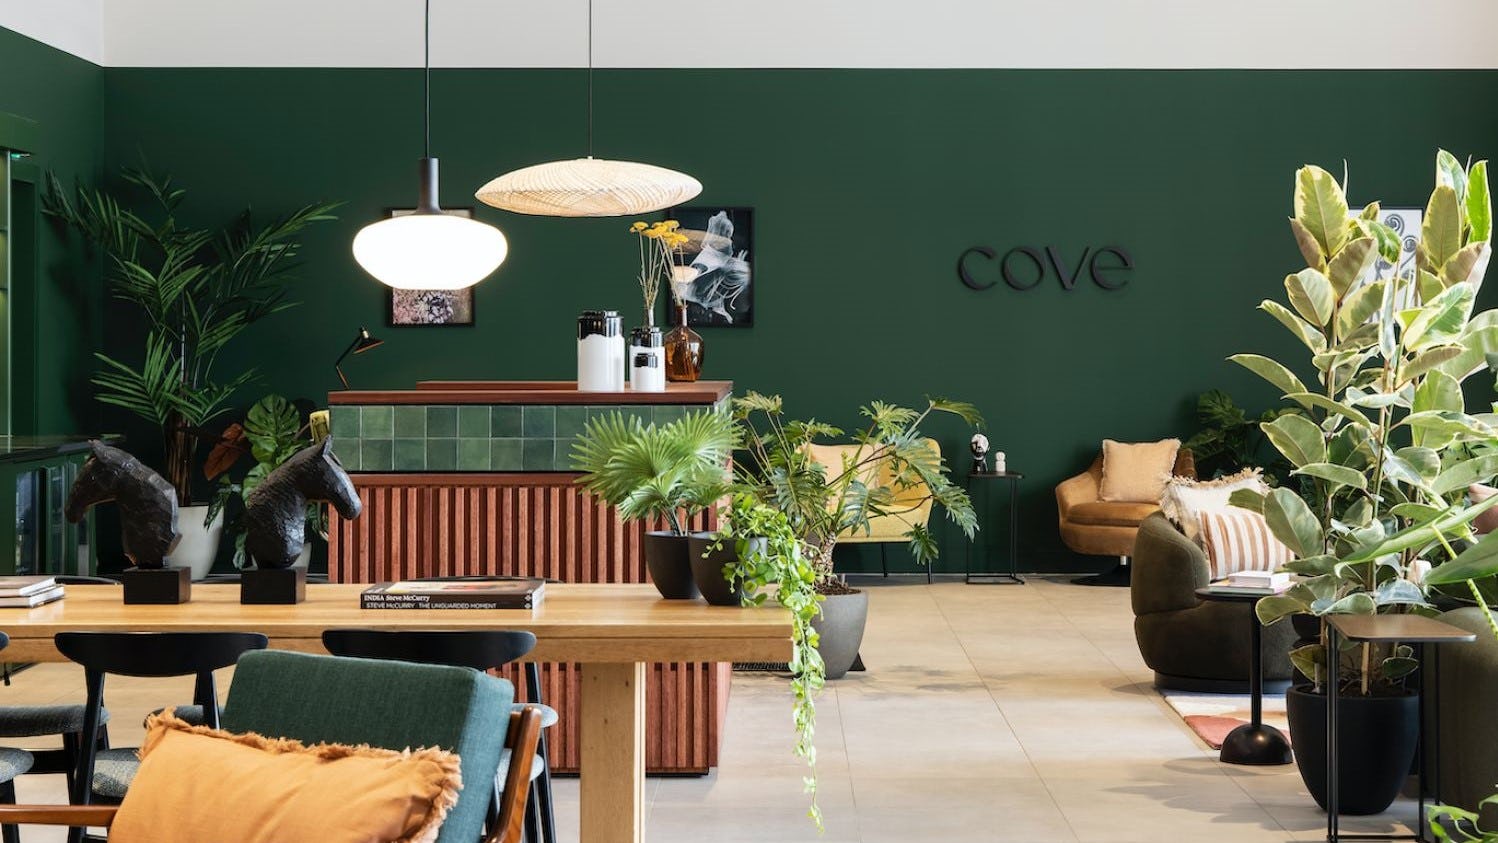 Cove opent eerste serviced apartments hotel in Nederland